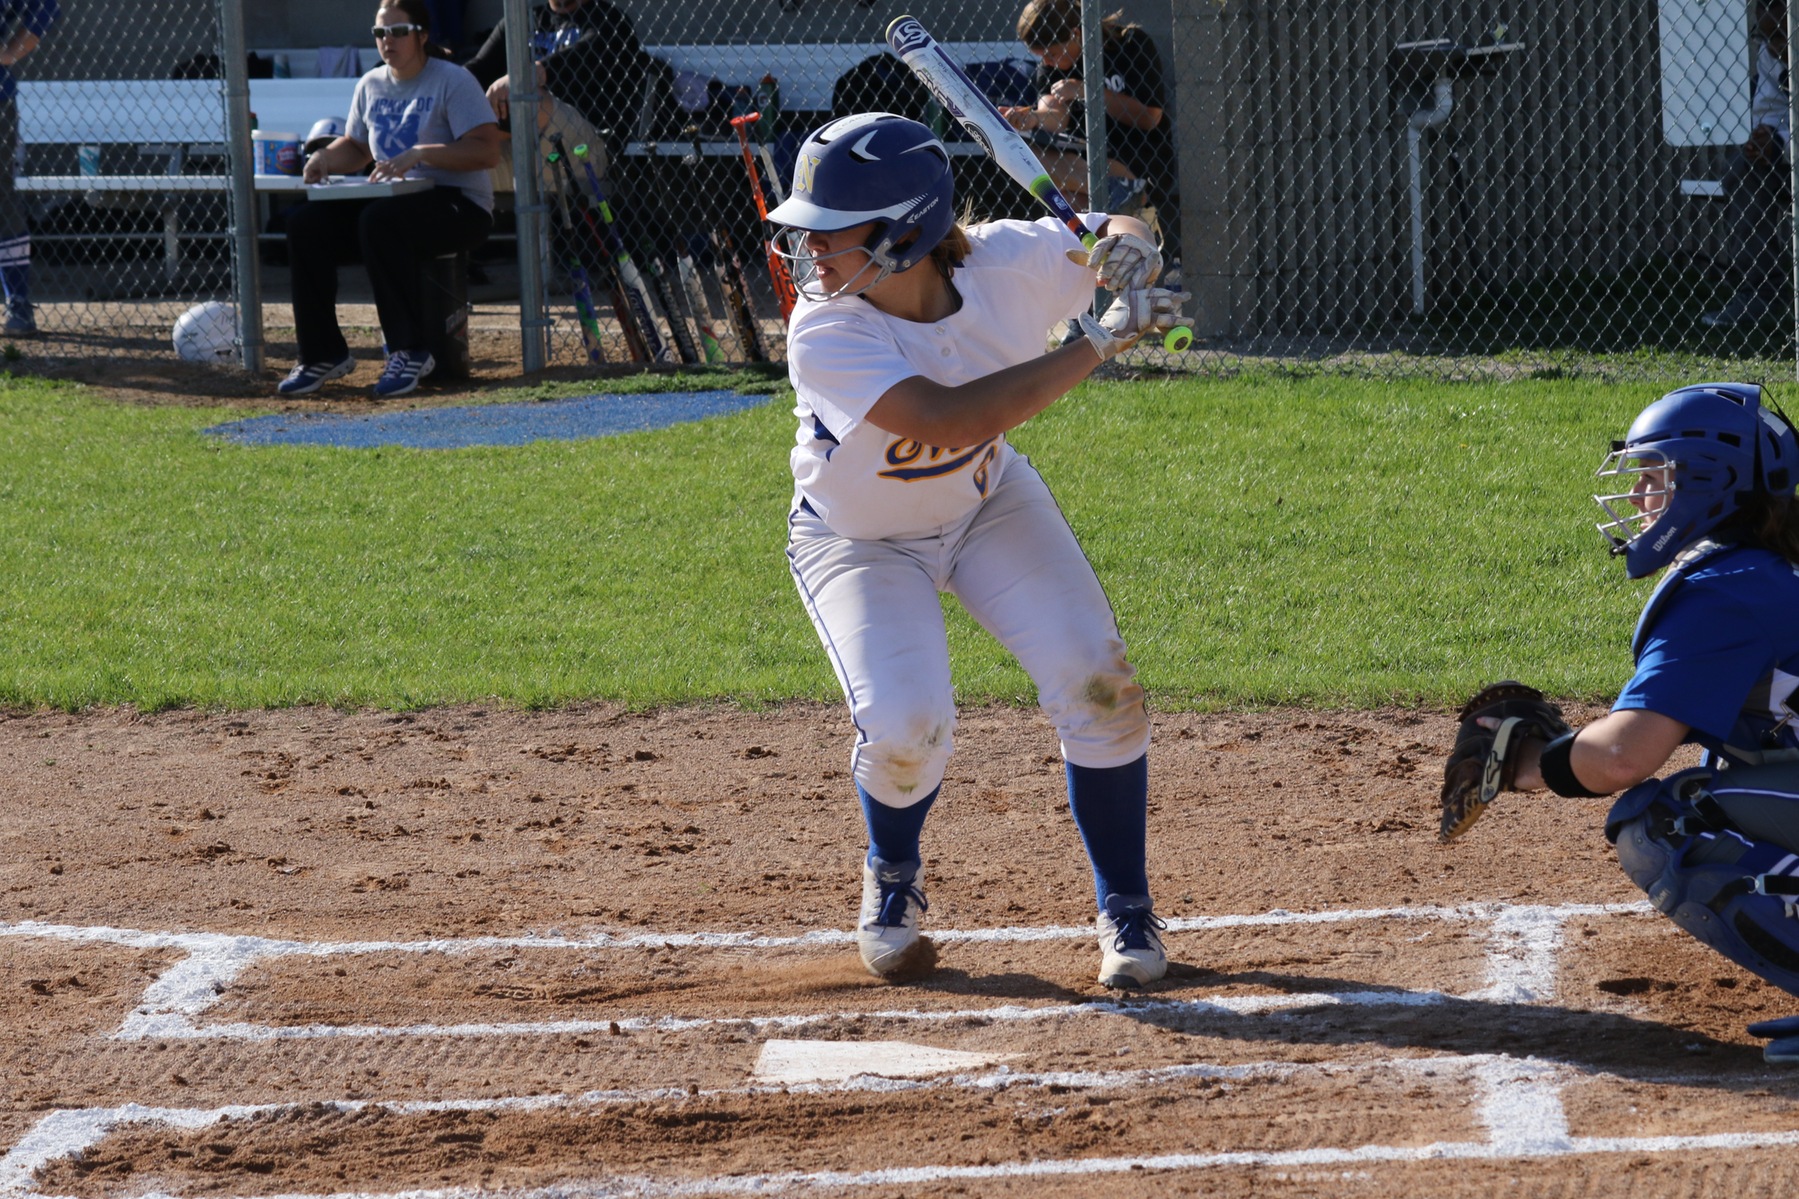 NIACC's Kendall Cornick hit .561 with 65 stolen bases in 2016 during her freshman season.